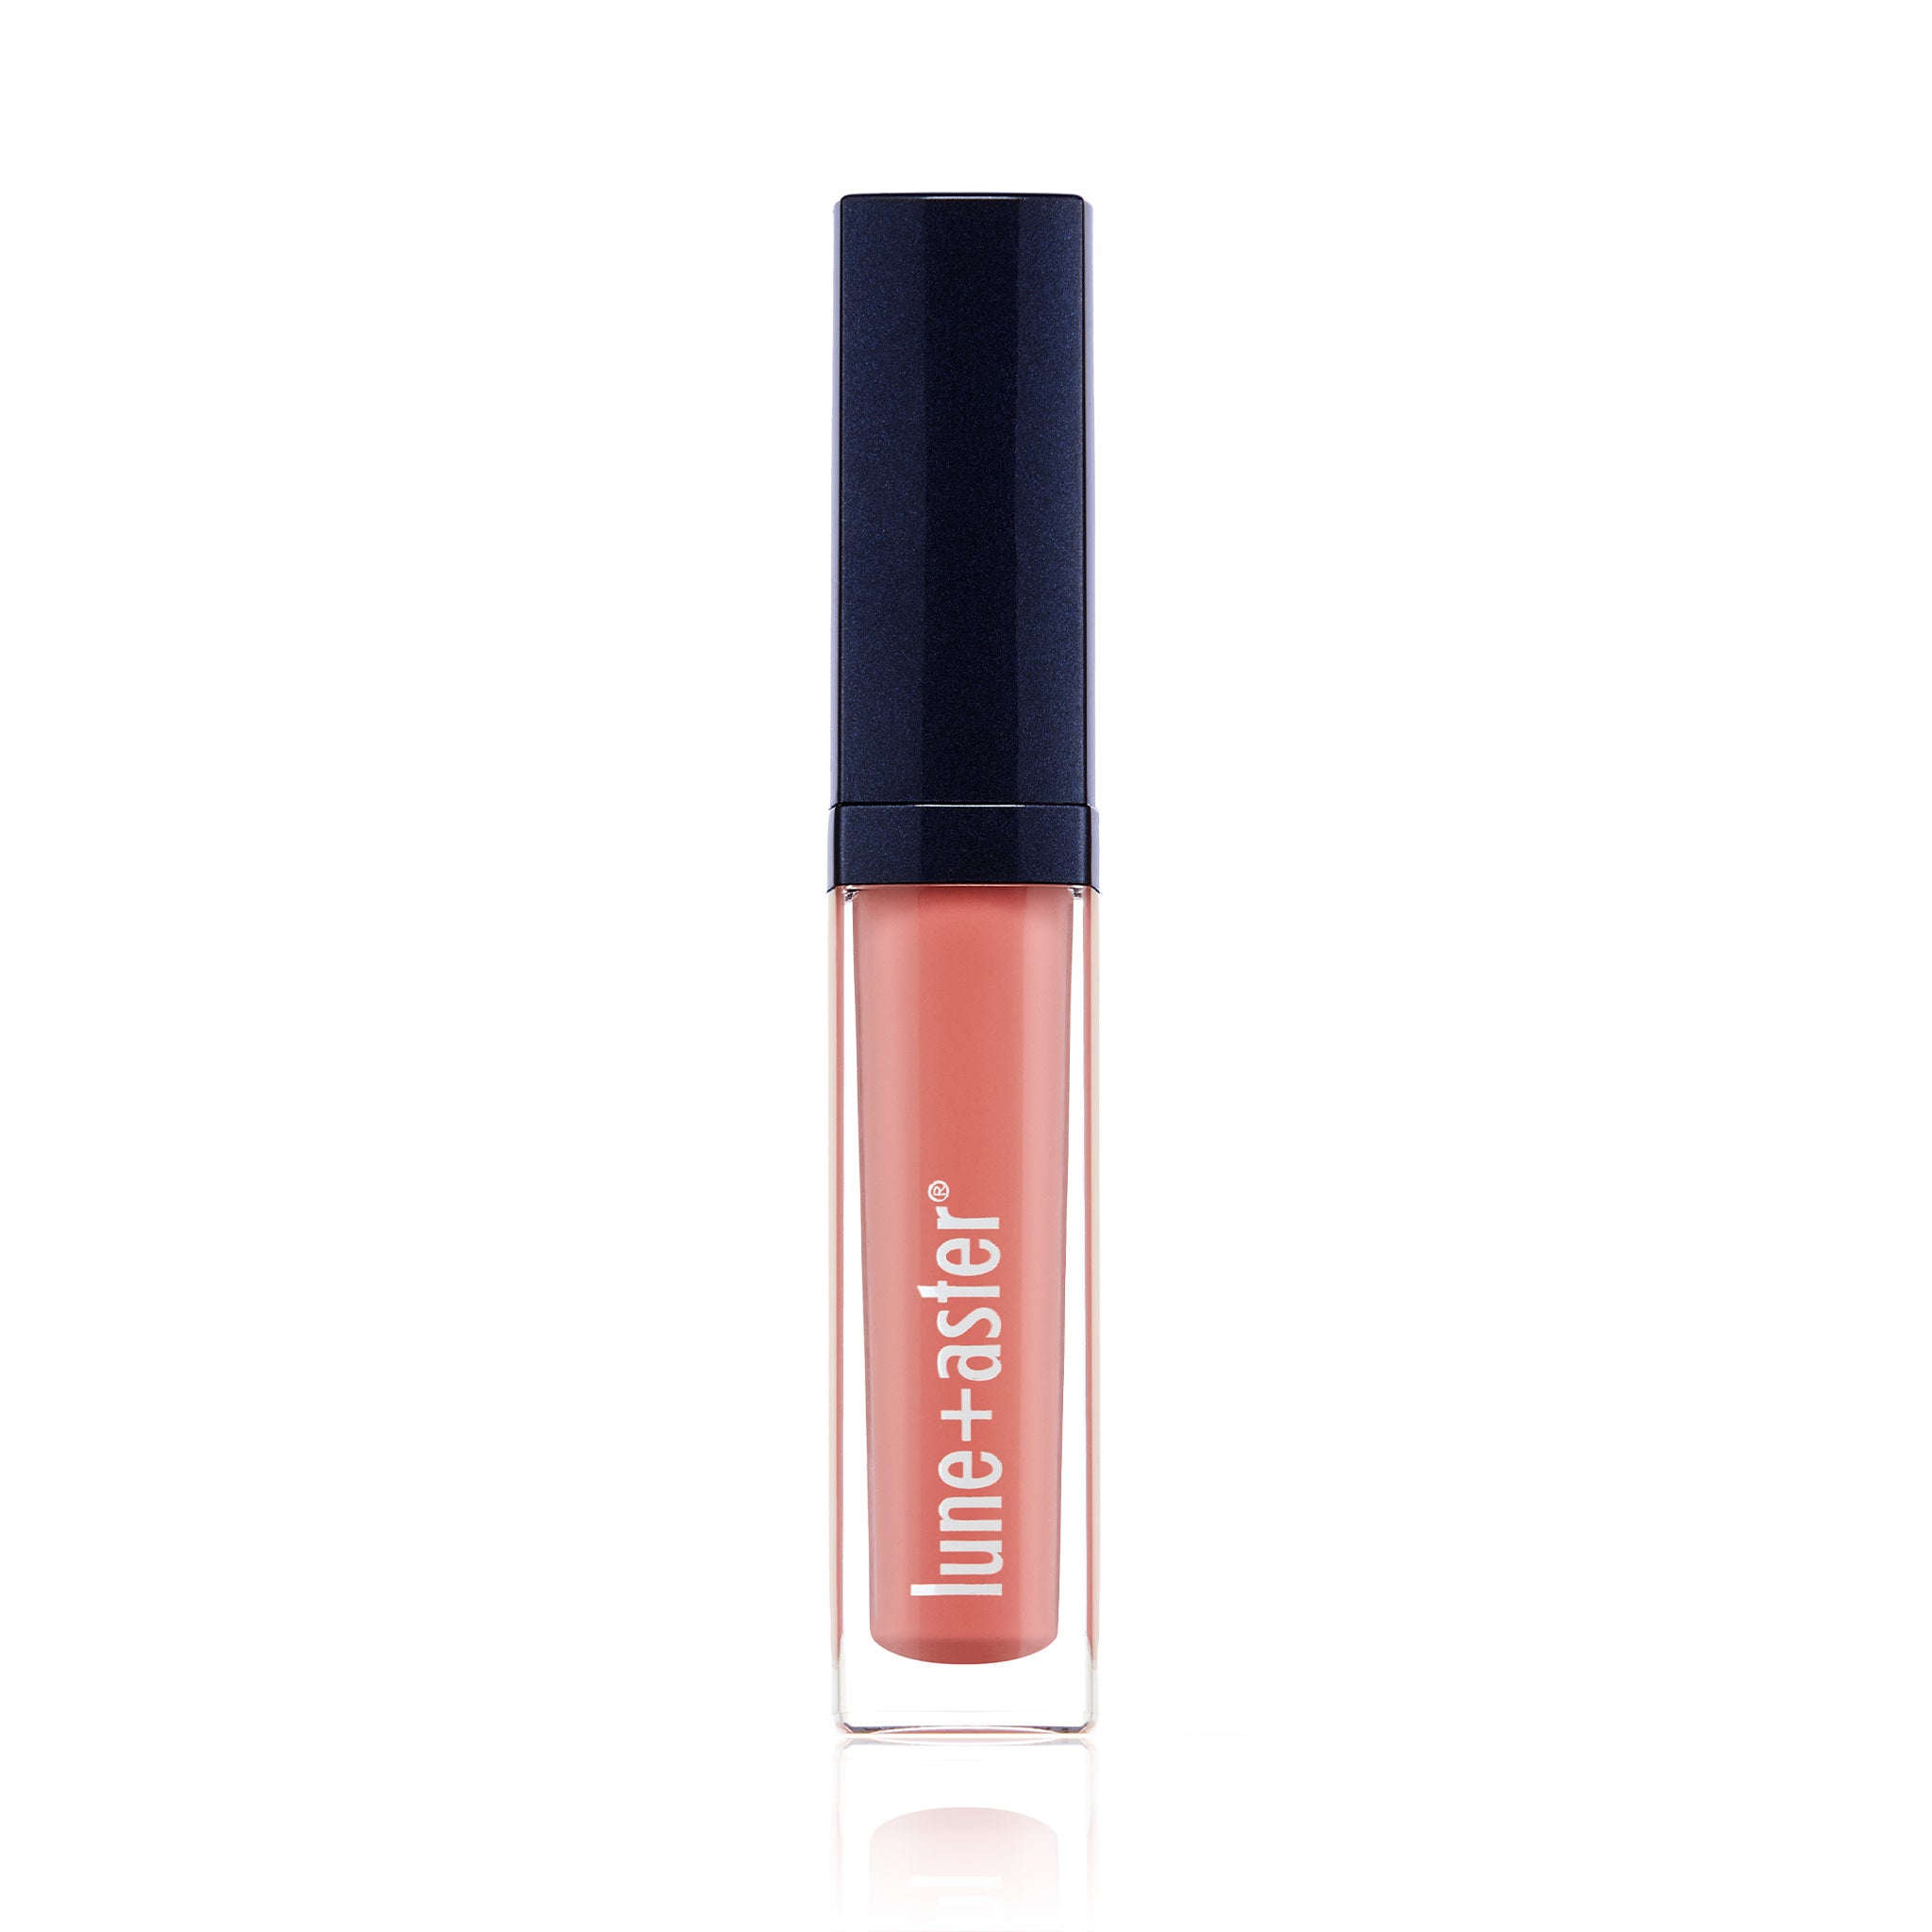 Lune+Aster Vitamin C+E Lip Gloss Color/Shade variant: Power Player main image. This product is in the color pink